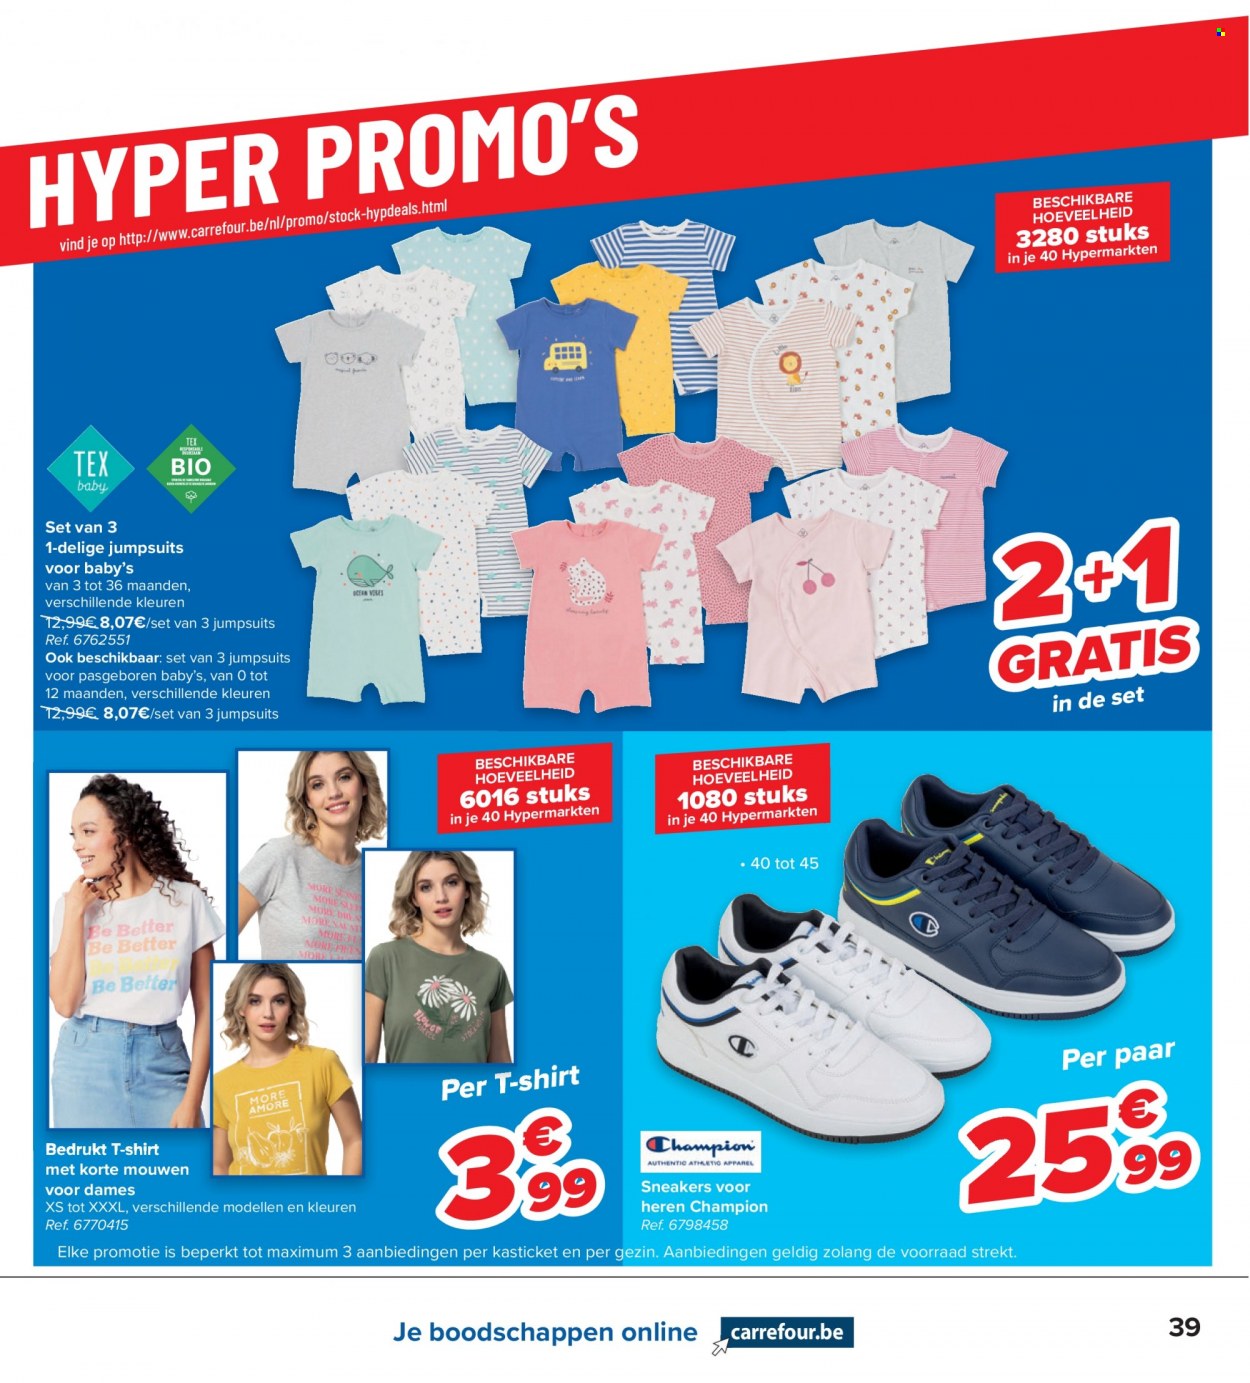 Catalogue Carrefour hypermarkt - 29.6.2022 - 11.7.2022. Page 19.